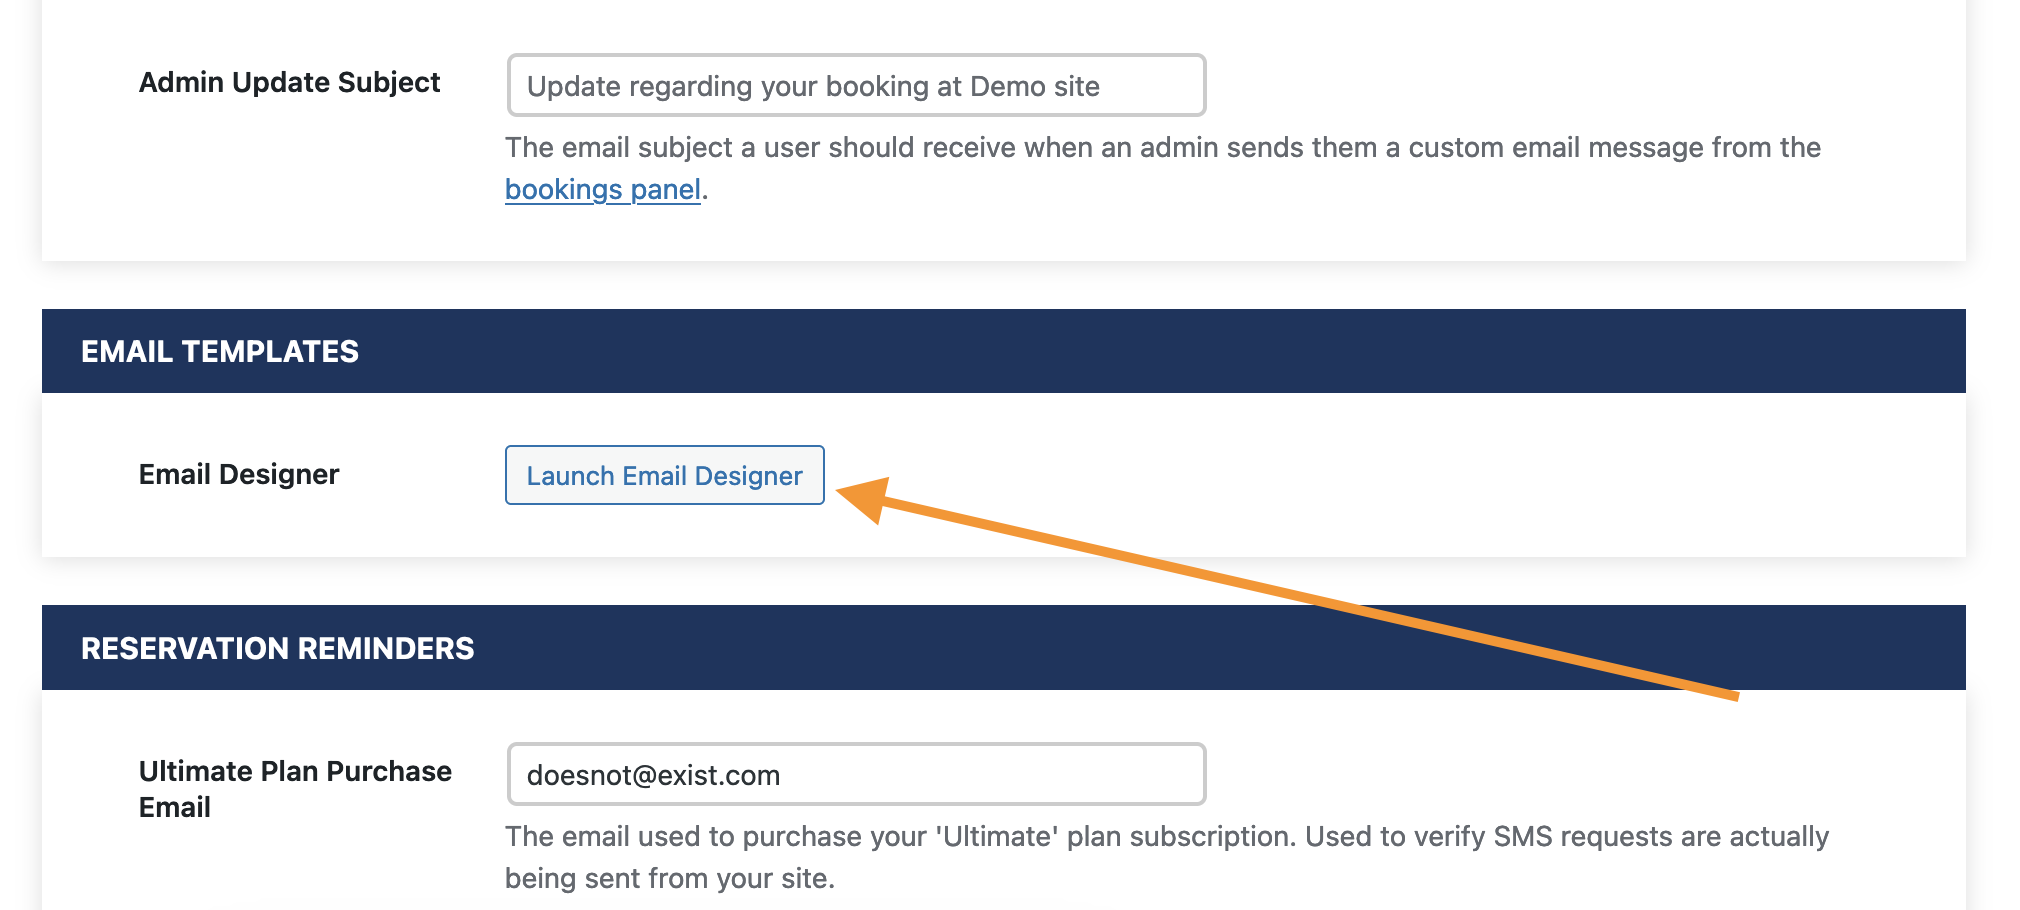 Screenshot indicating the button to launch the email designer